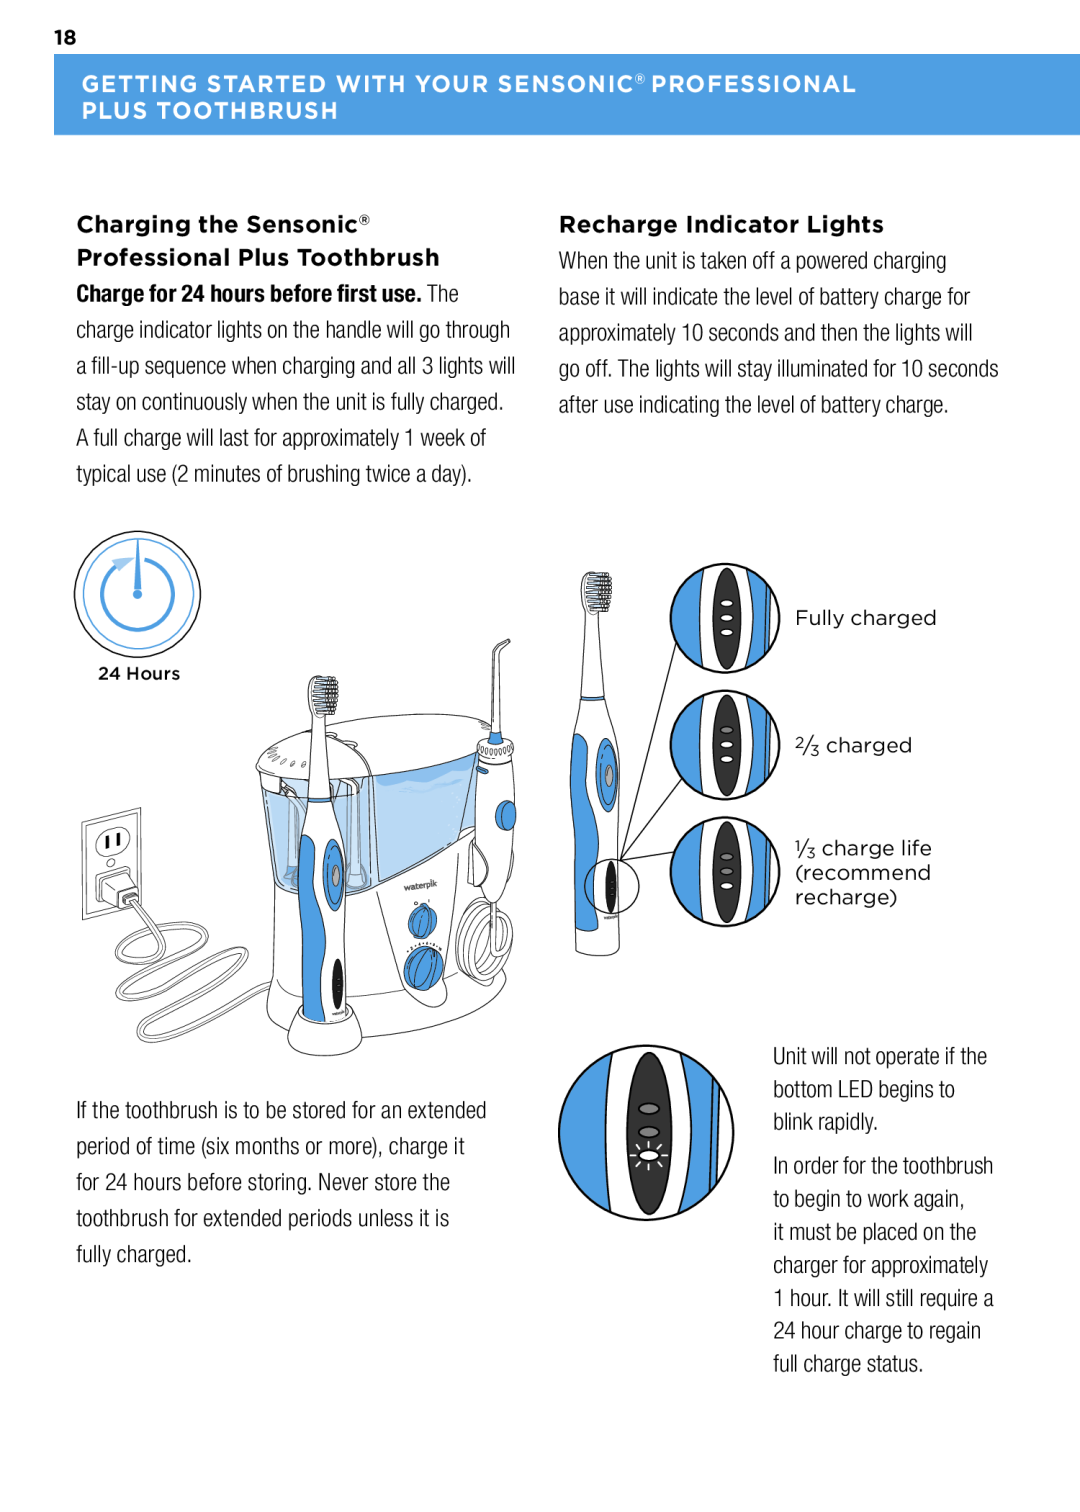 Waterpik Technologies wp-900 GETTING STARTED WITH yOUR SENSONIC PROFESSIONAL PLUS TOOTHBRUSH, Recharge Indicator Lights 